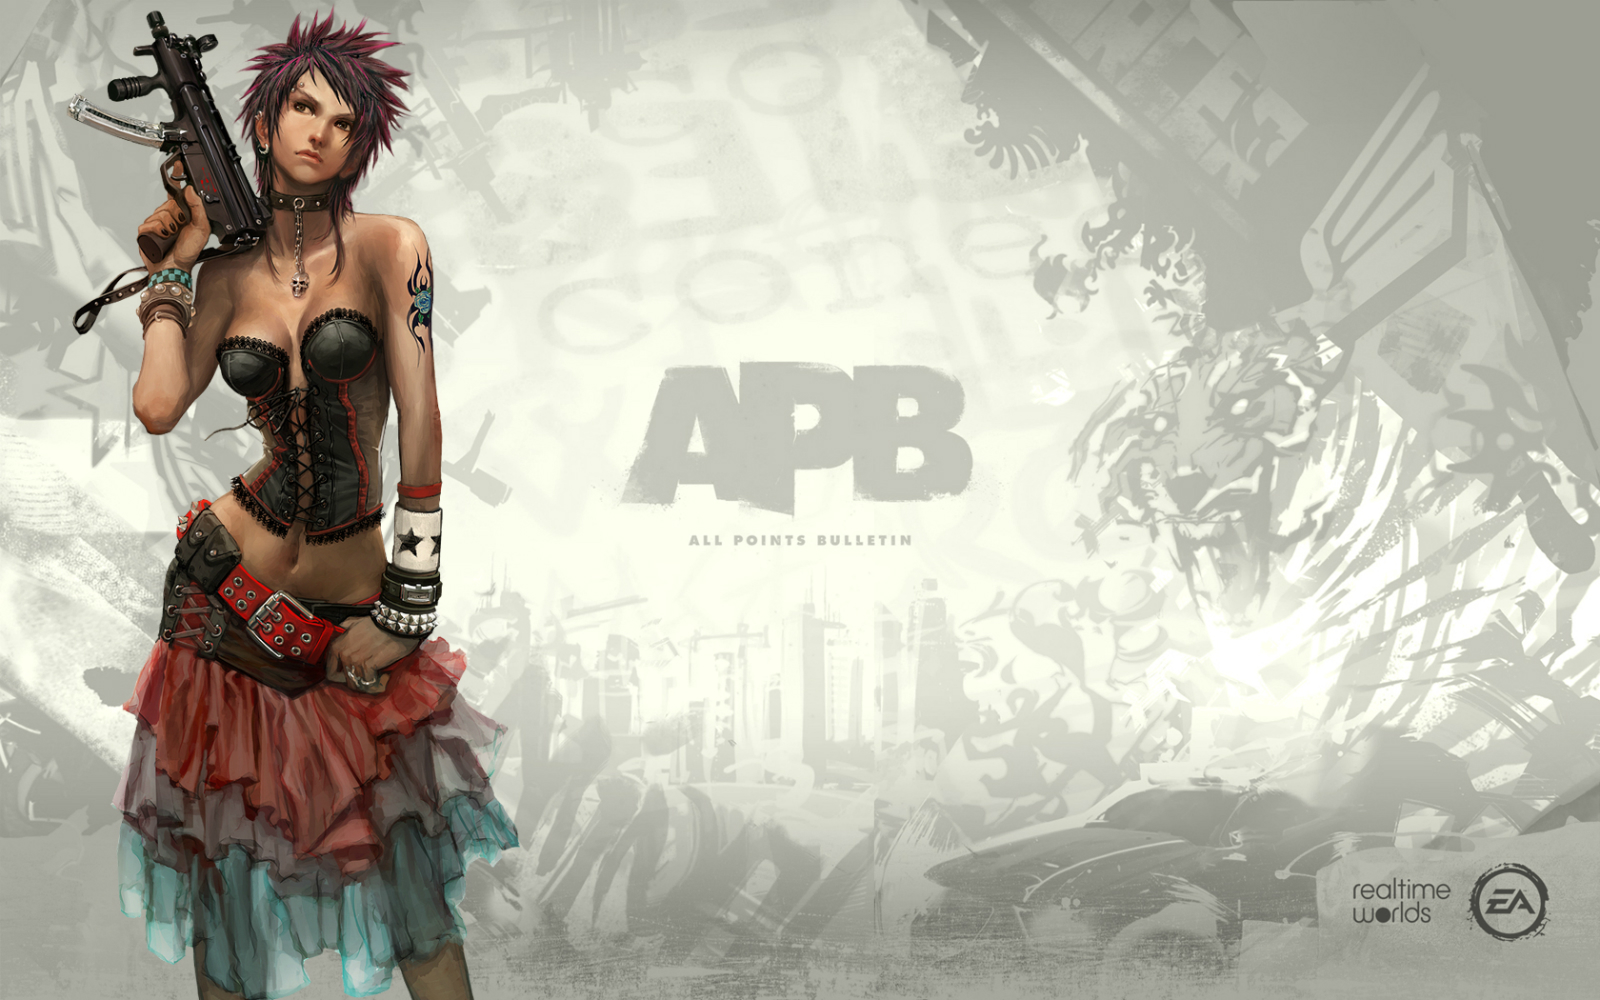 Central Wallpaper Apb Reloaded All Points Bulletin HD Game